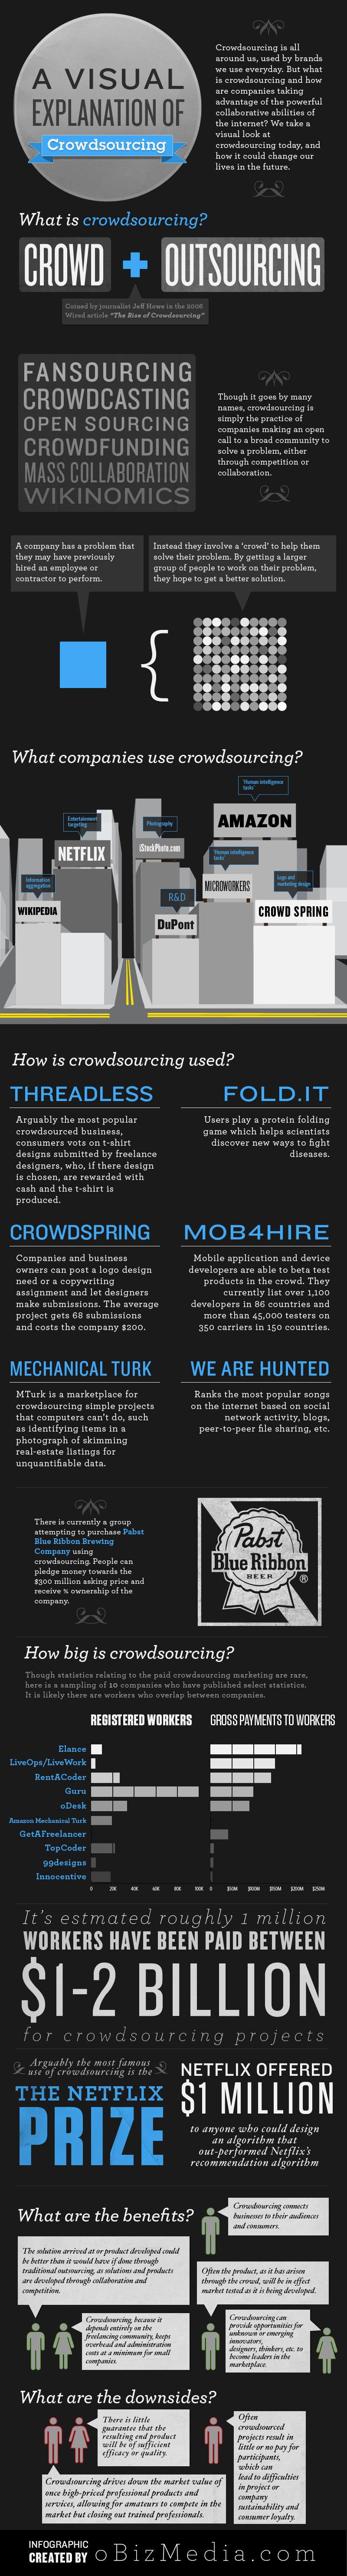 crowdsourcing_infographic